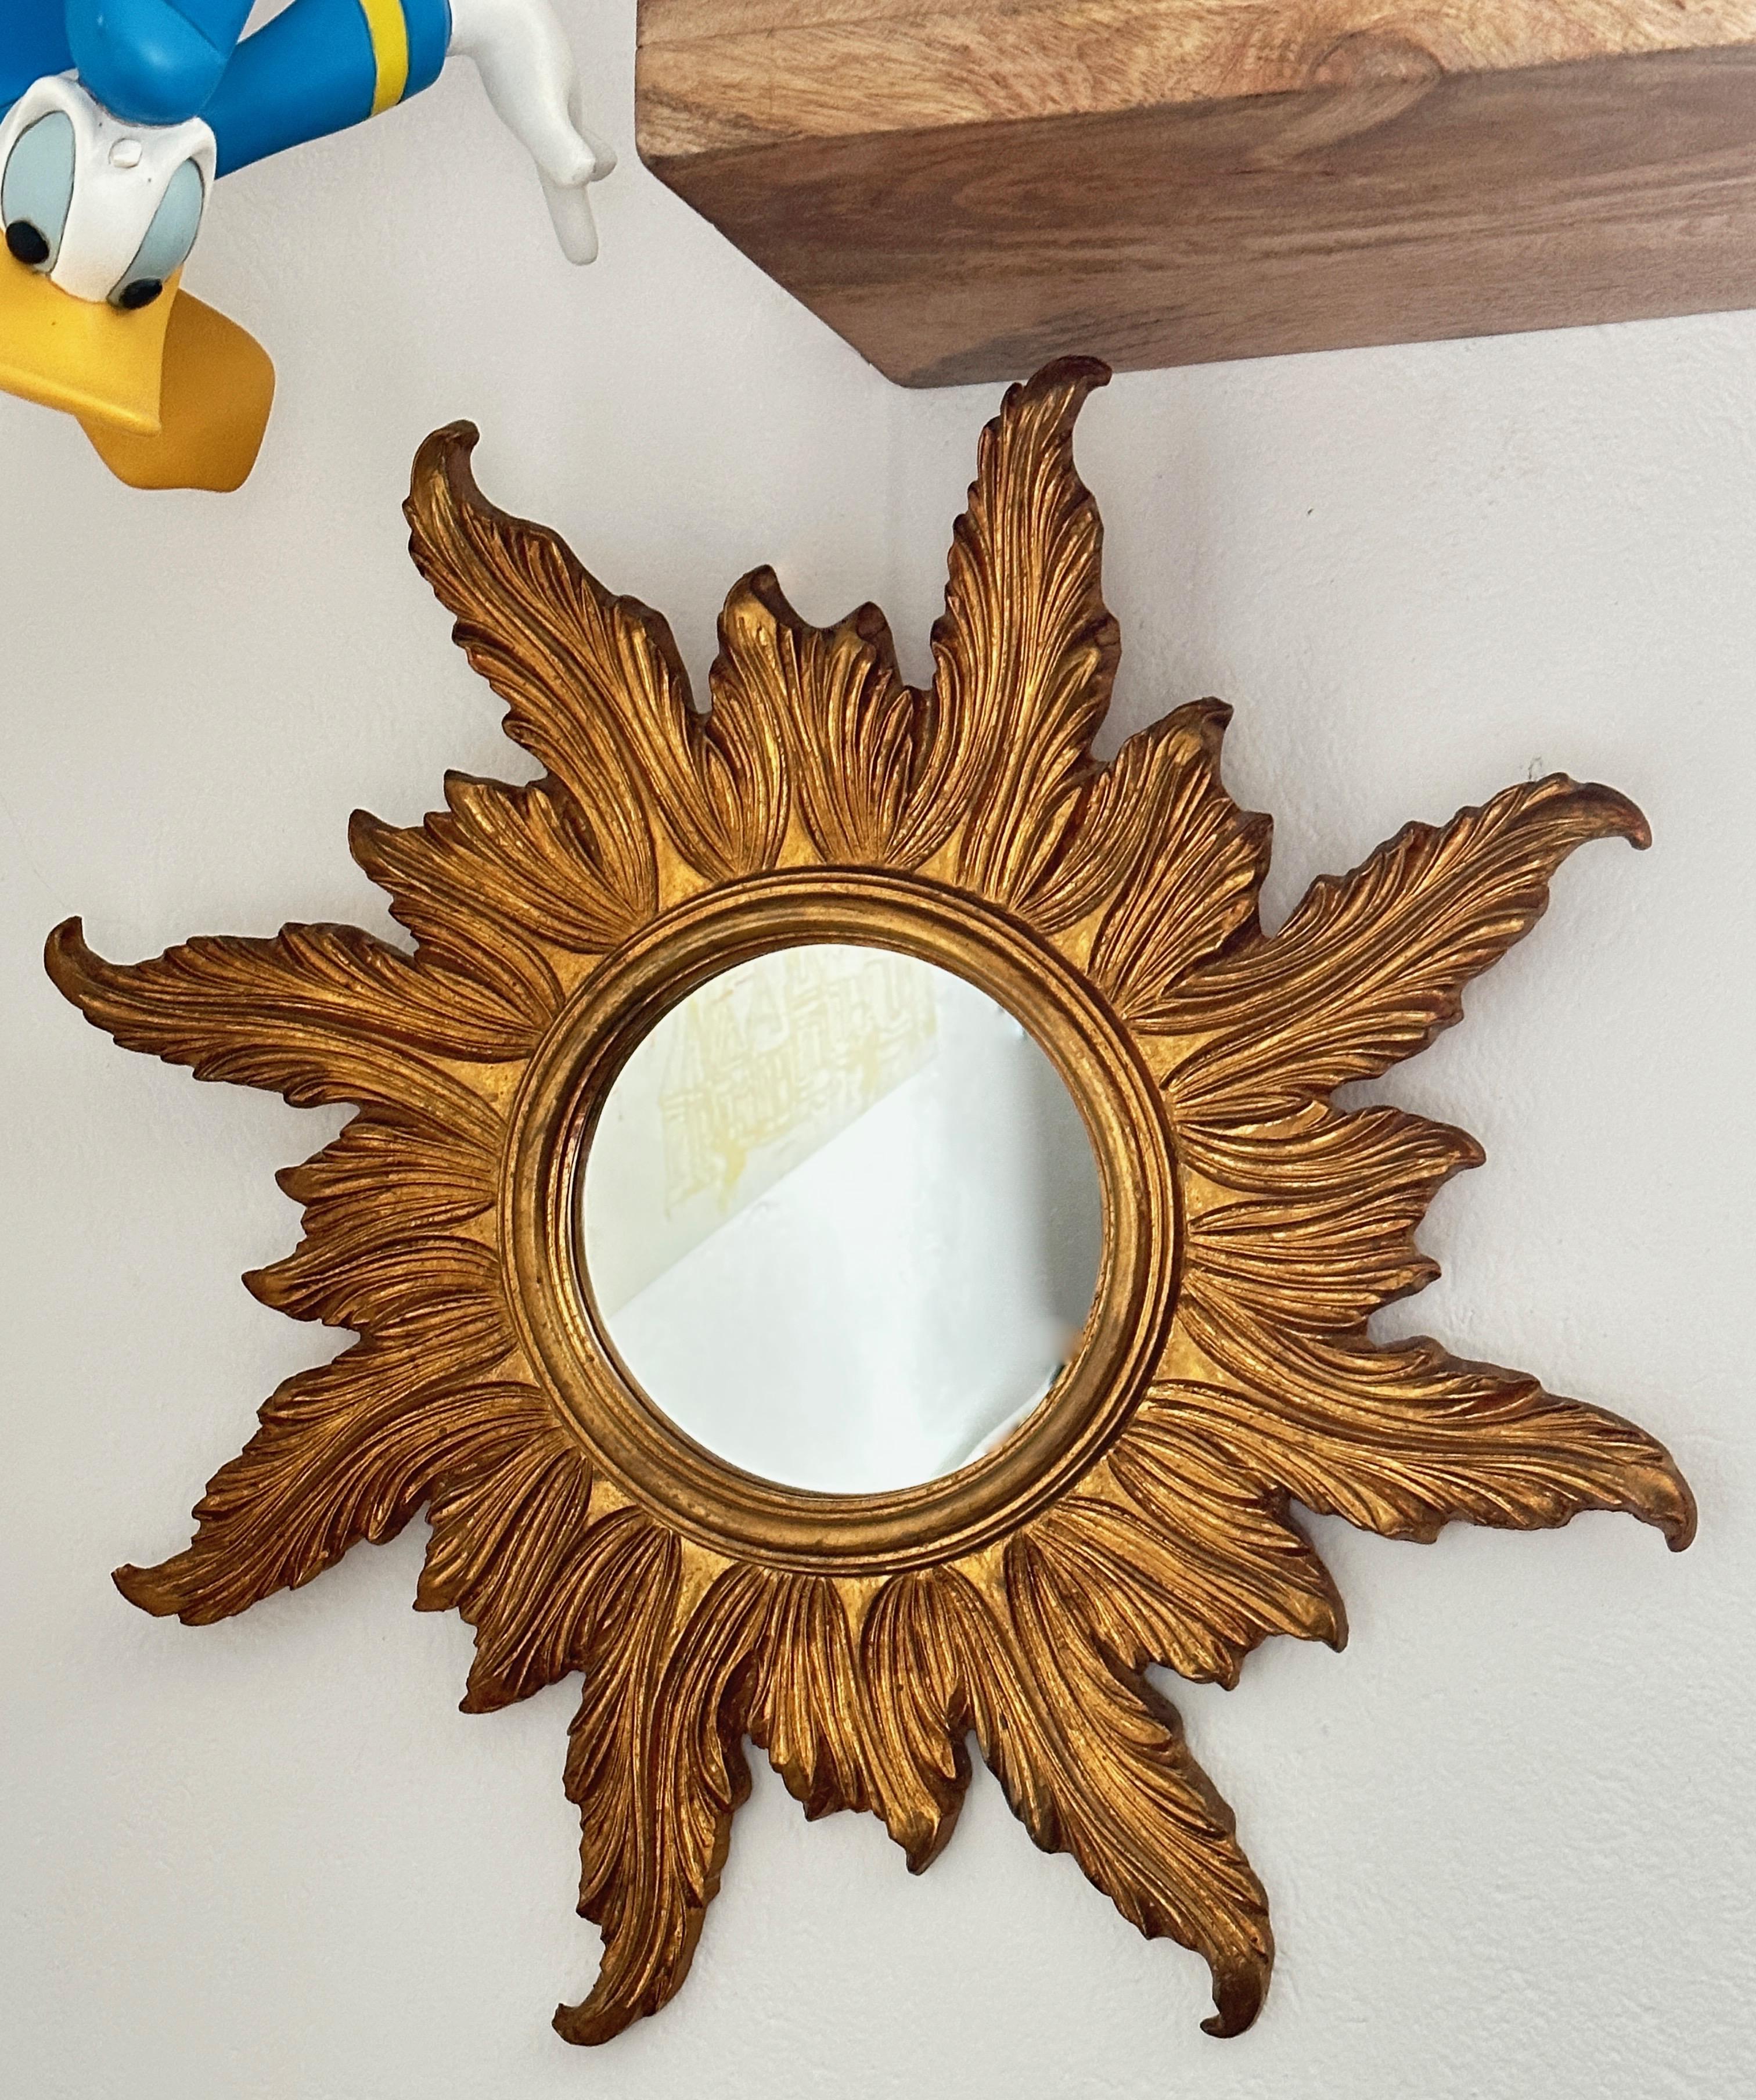 A beautiful starburst sunburst mirror. Made of gilded composition and wood. It measures approximate 22.63